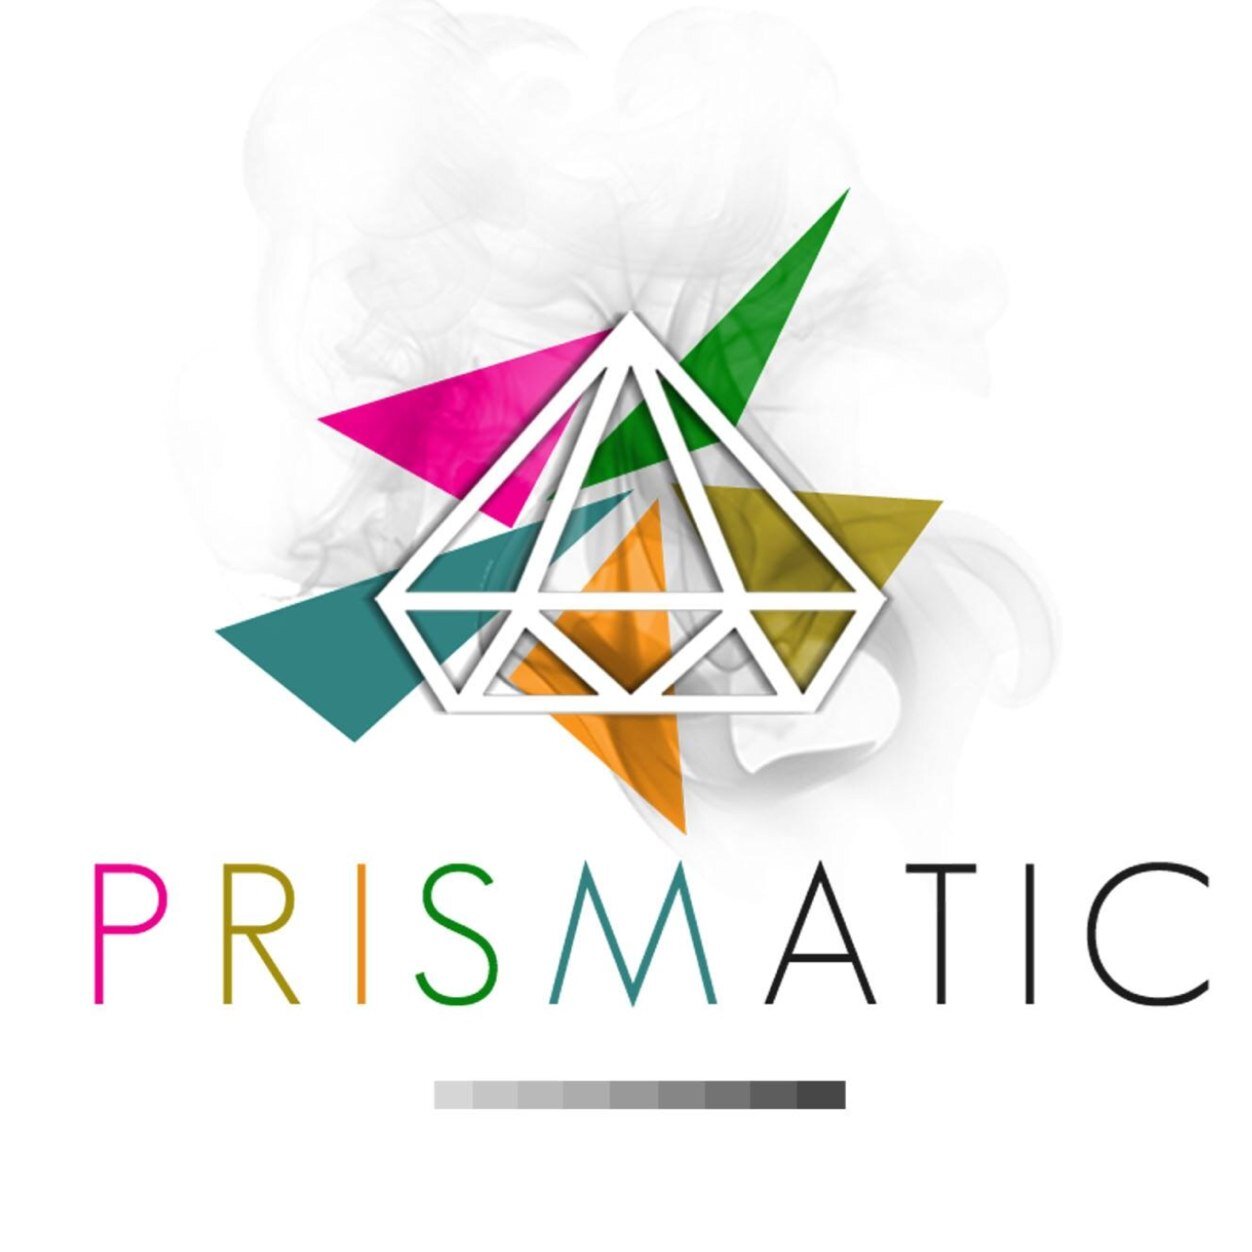 P R I S M A T I C is the consciousness of dope and divine, an agency of rhythm and logic. Peer into our facets to get our take on human nature and culture.